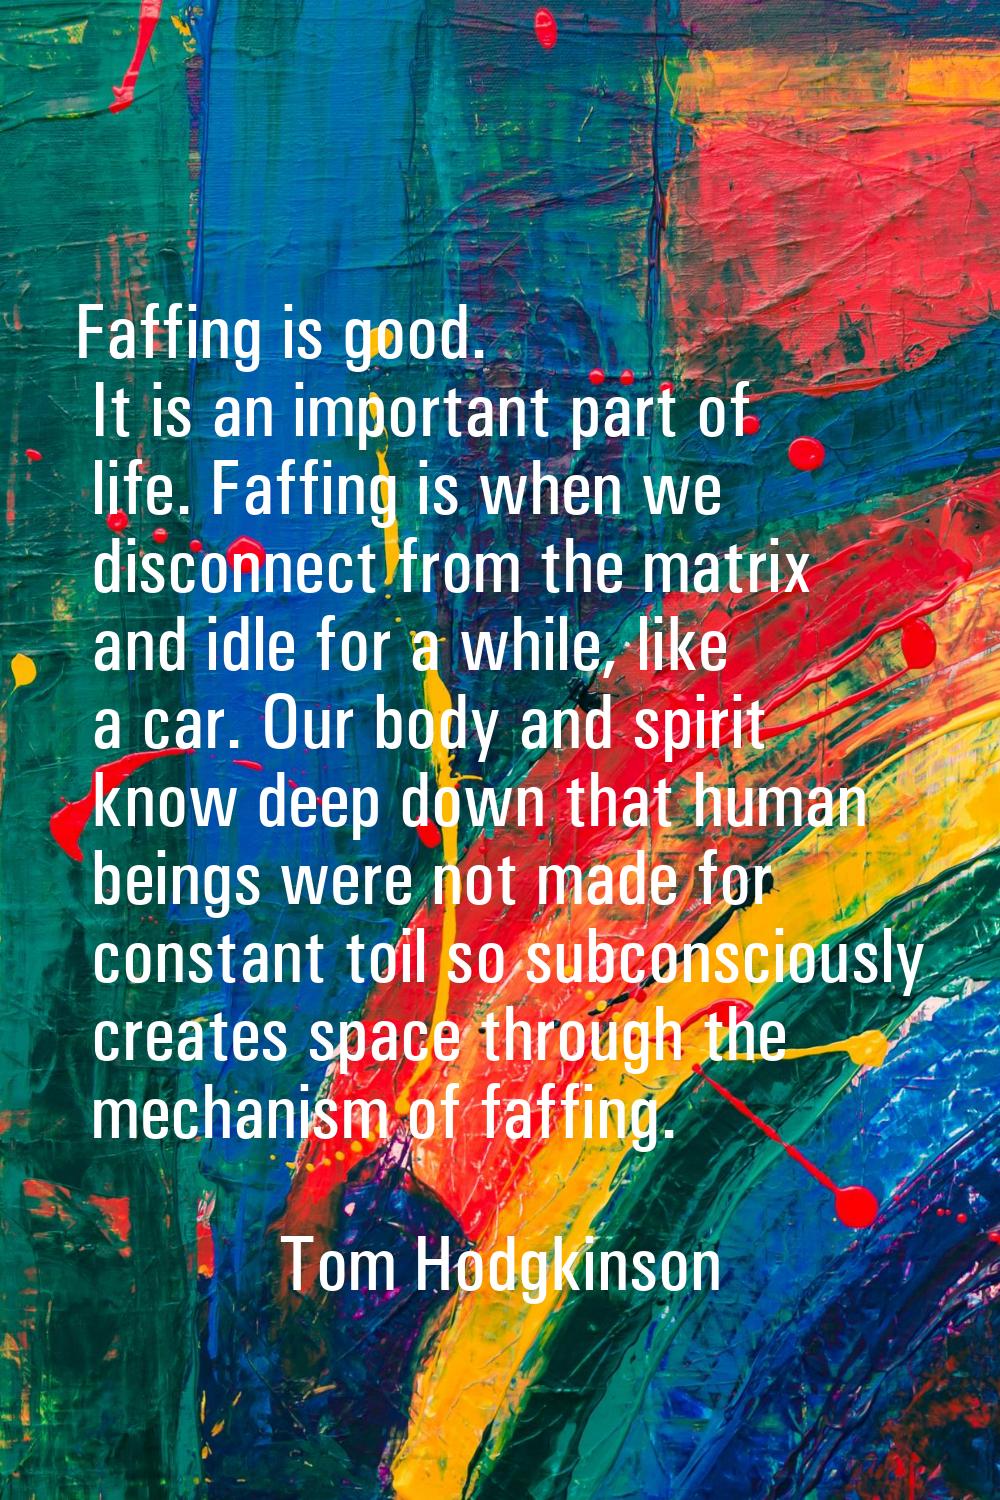 Faffing is good. It is an important part of life. Faffing is when we disconnect from the matrix and